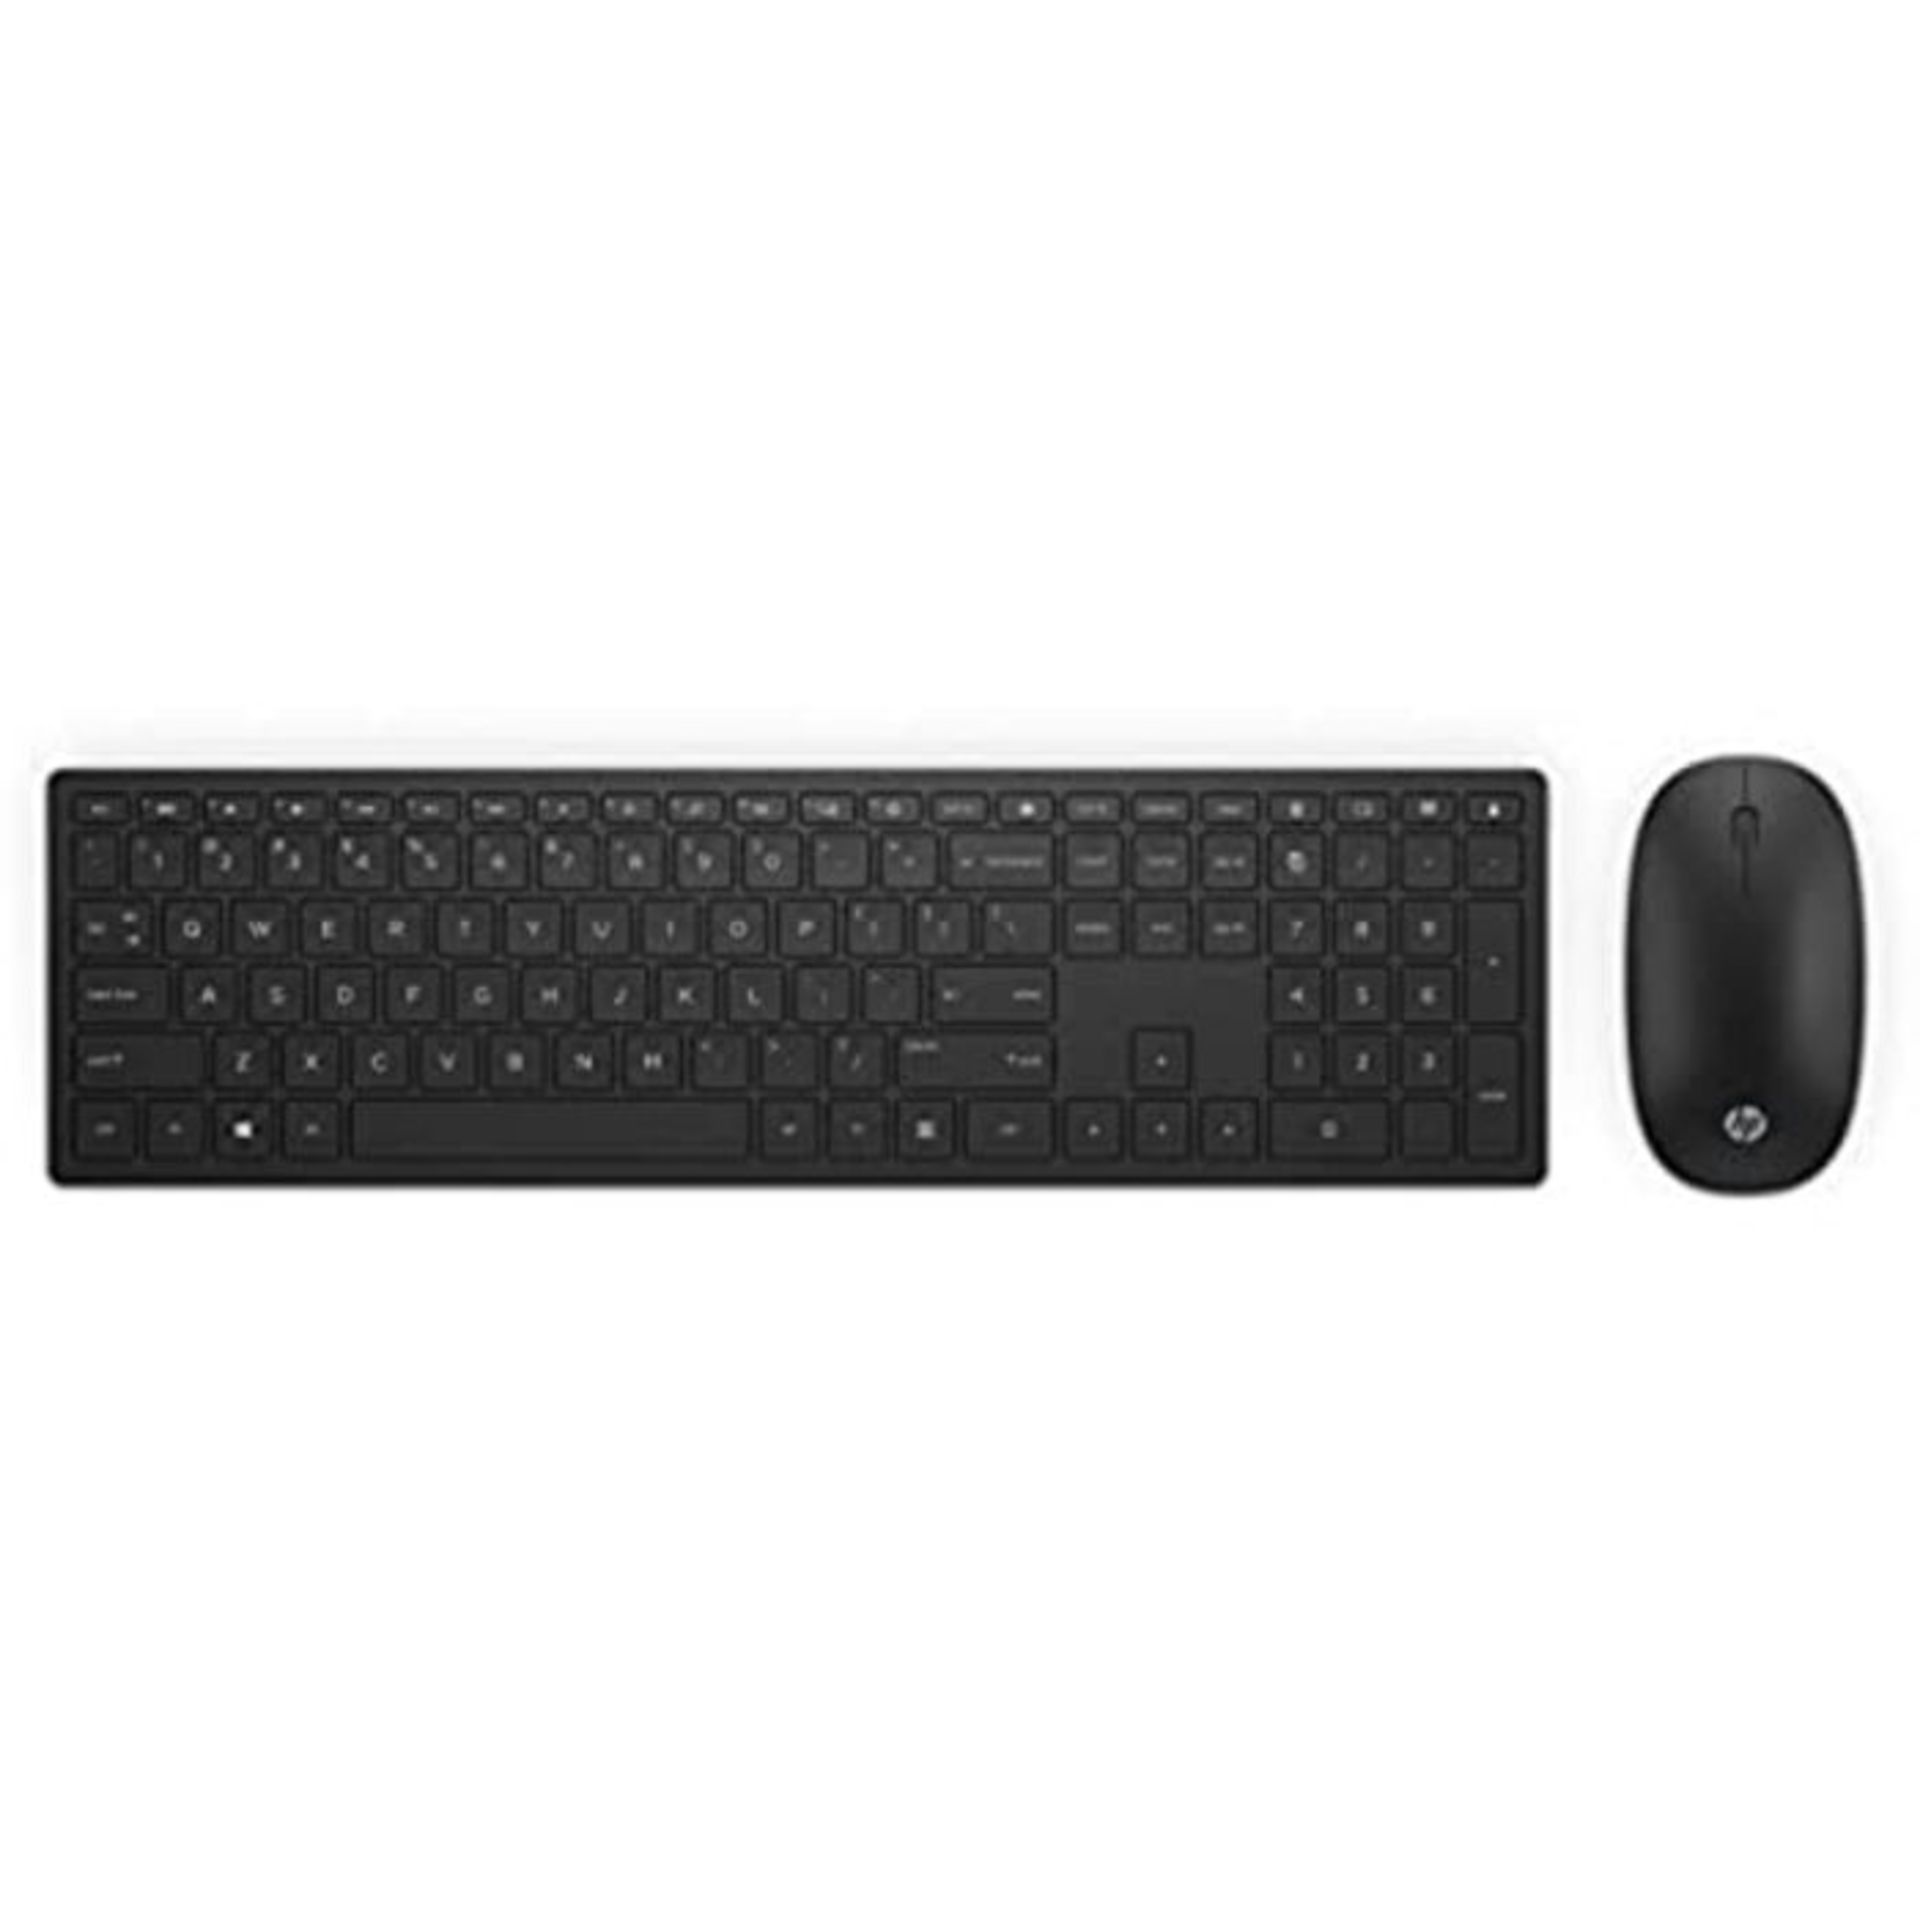 RRP £50.00 HP Pavilion 800 Wireless QWERTZ Keyboard and Mouse Combo (Nano USB Receiver, 2 AAA Bat